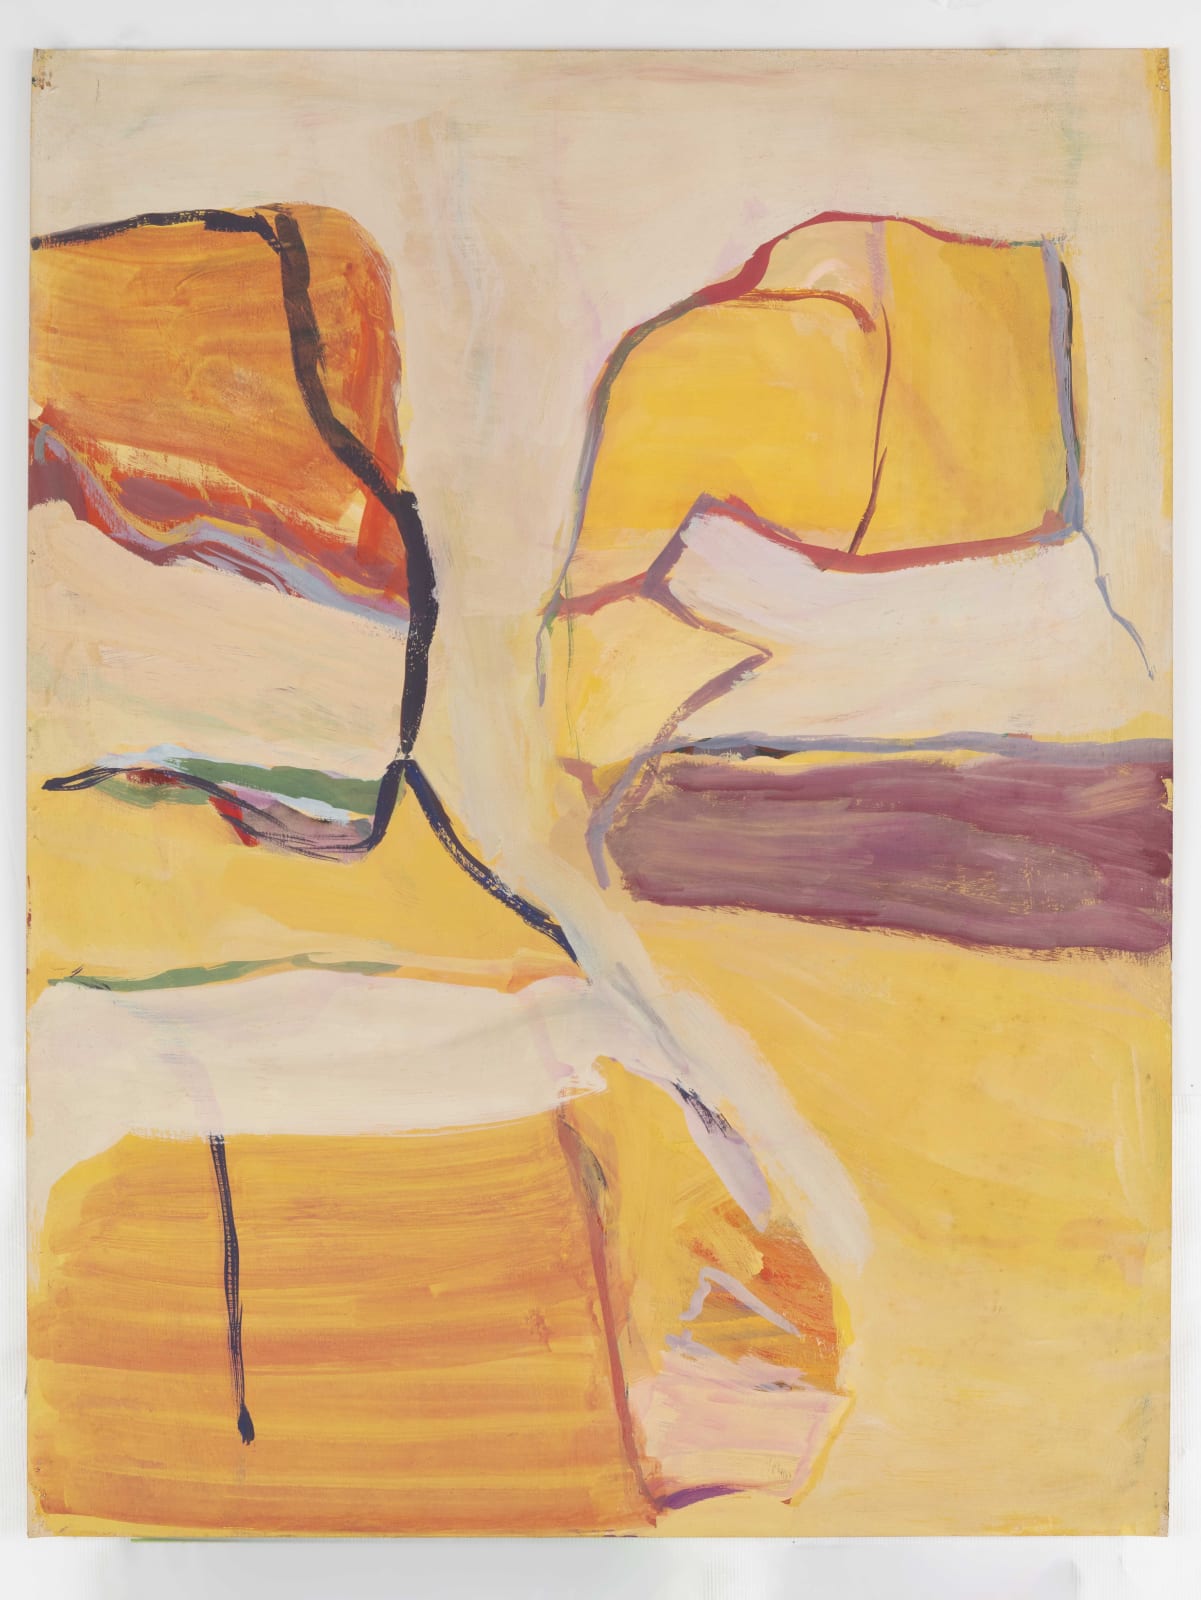 Shirley Jaffe Untitled, 1964-1970 ca. Mixed media on paper 77,5 x 64 x 3,5 cm (30 1/2 x 25 3/16 x 1 3/8 in) framed